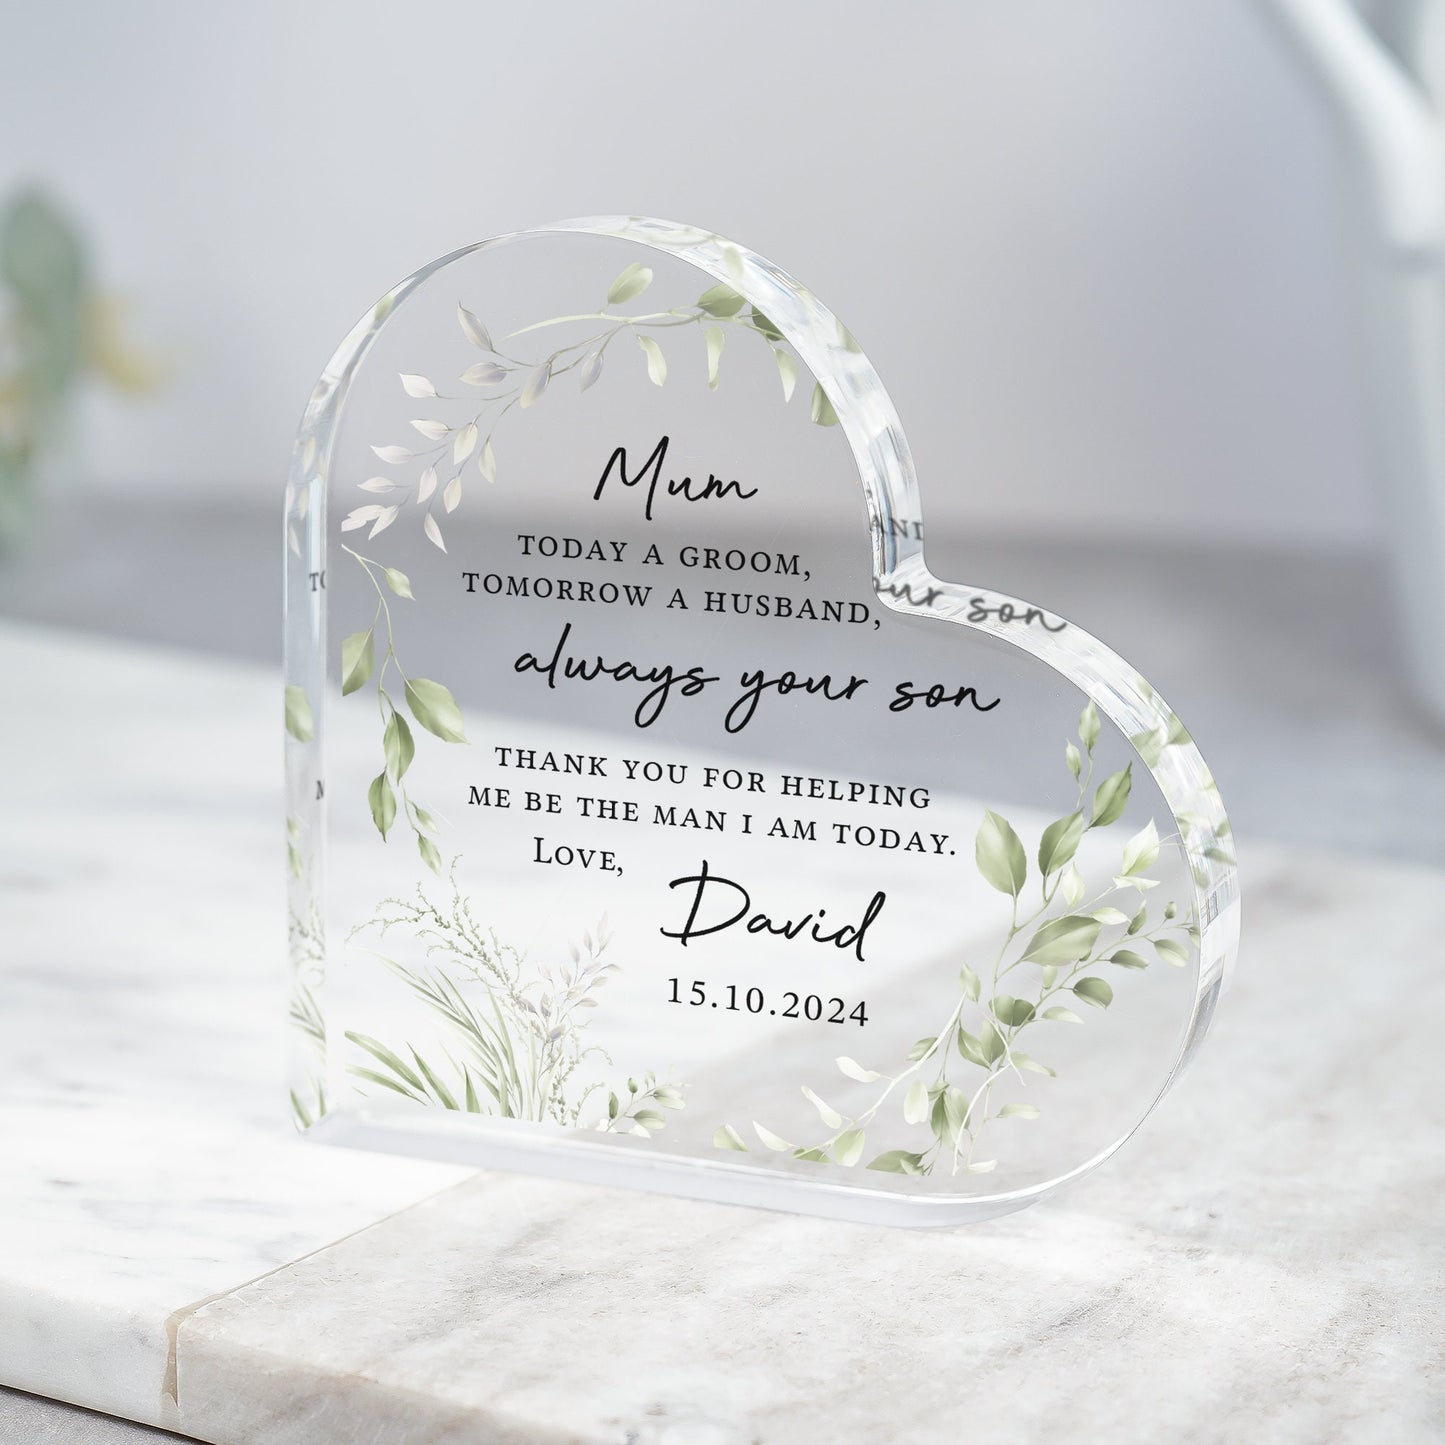 Personalised Mother of the Groom Gift, Gifts from the Groom, Parents of the Bride Thank you Gifts, Mum of Groom Gift, Wedding Day Presents